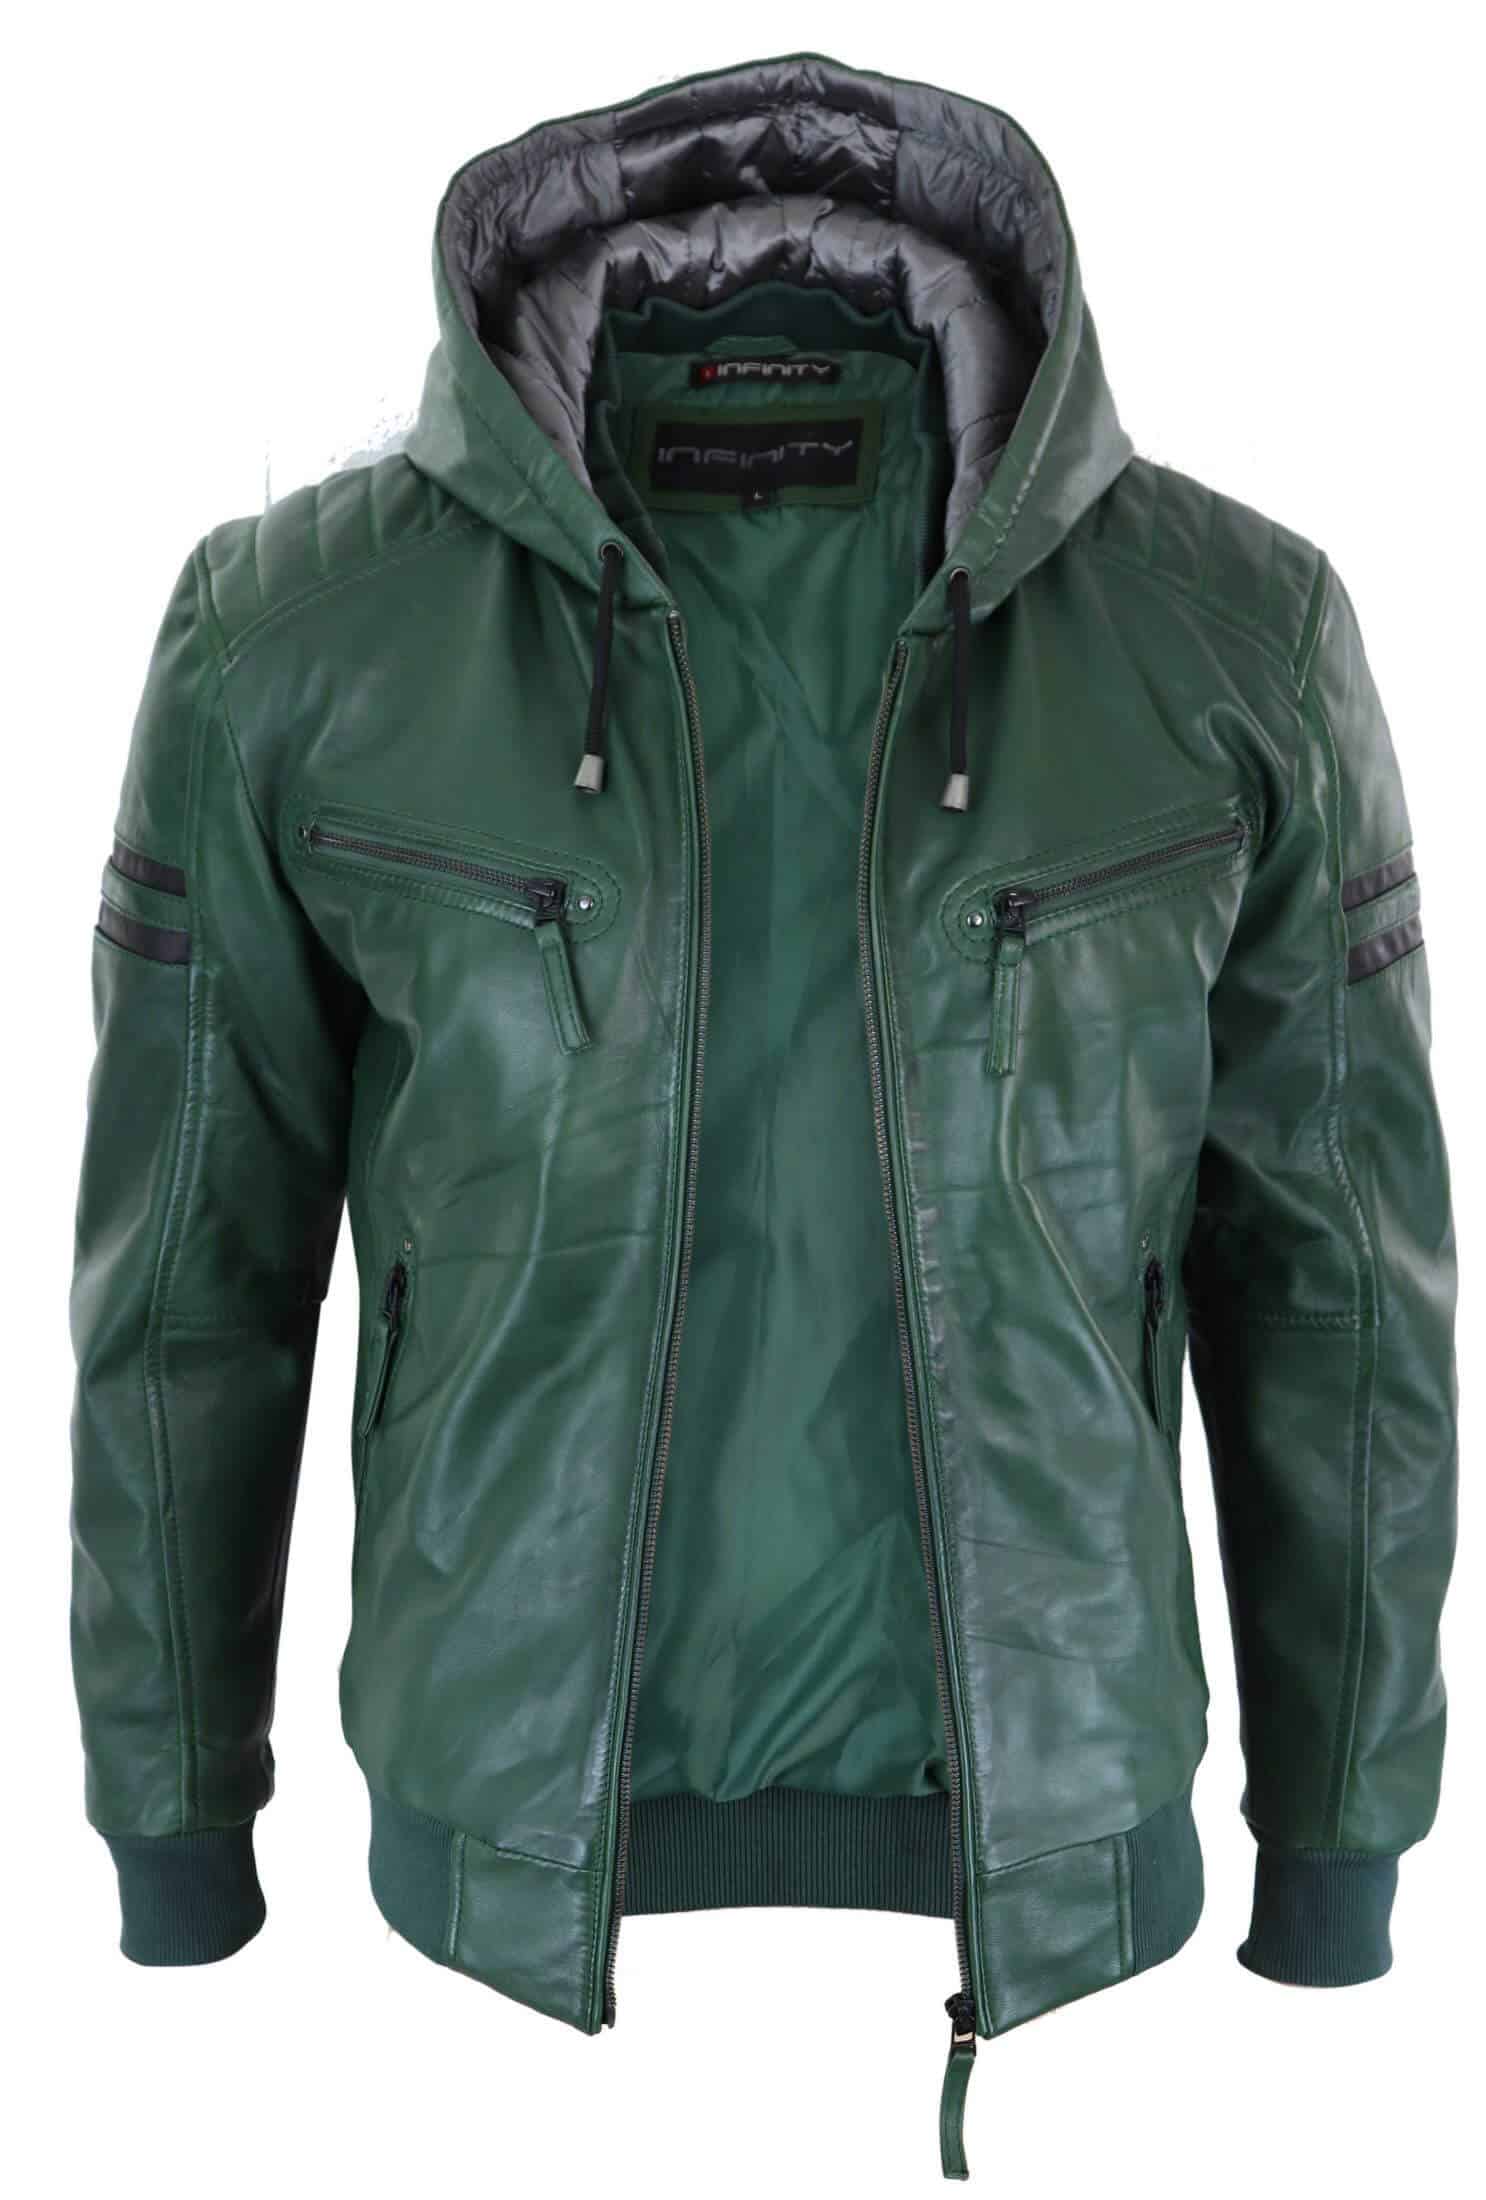 Men's Real Leather Bomber Jacket with Hood-Green: Buy Online - Happy ...